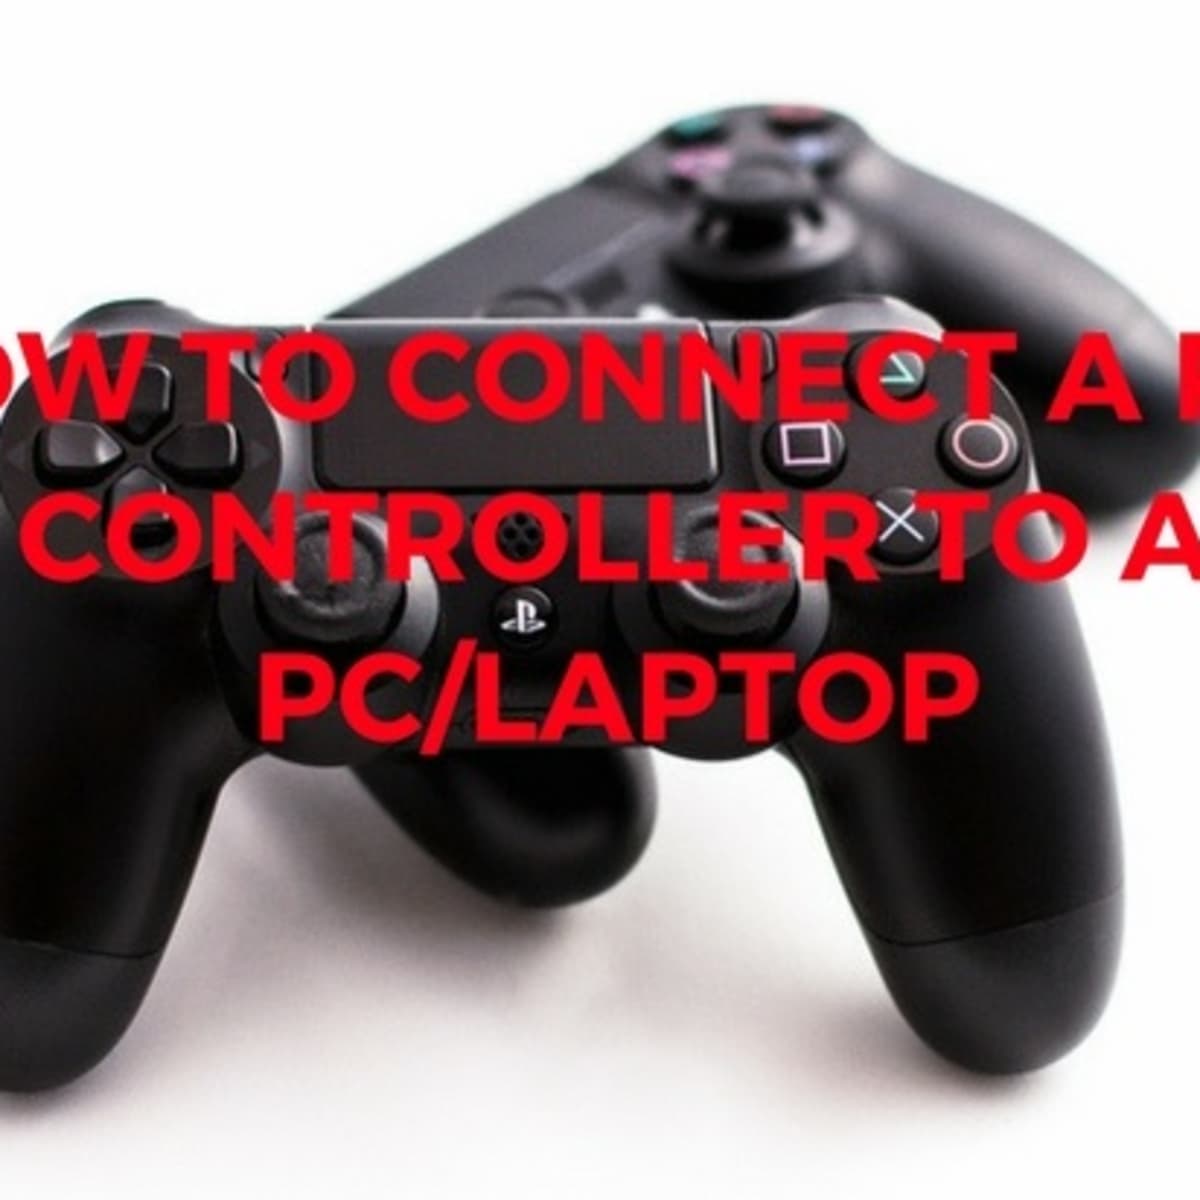 Van Skur Admin How to Connect a PS4 Controller to a PC/Laptop - TurboFuture